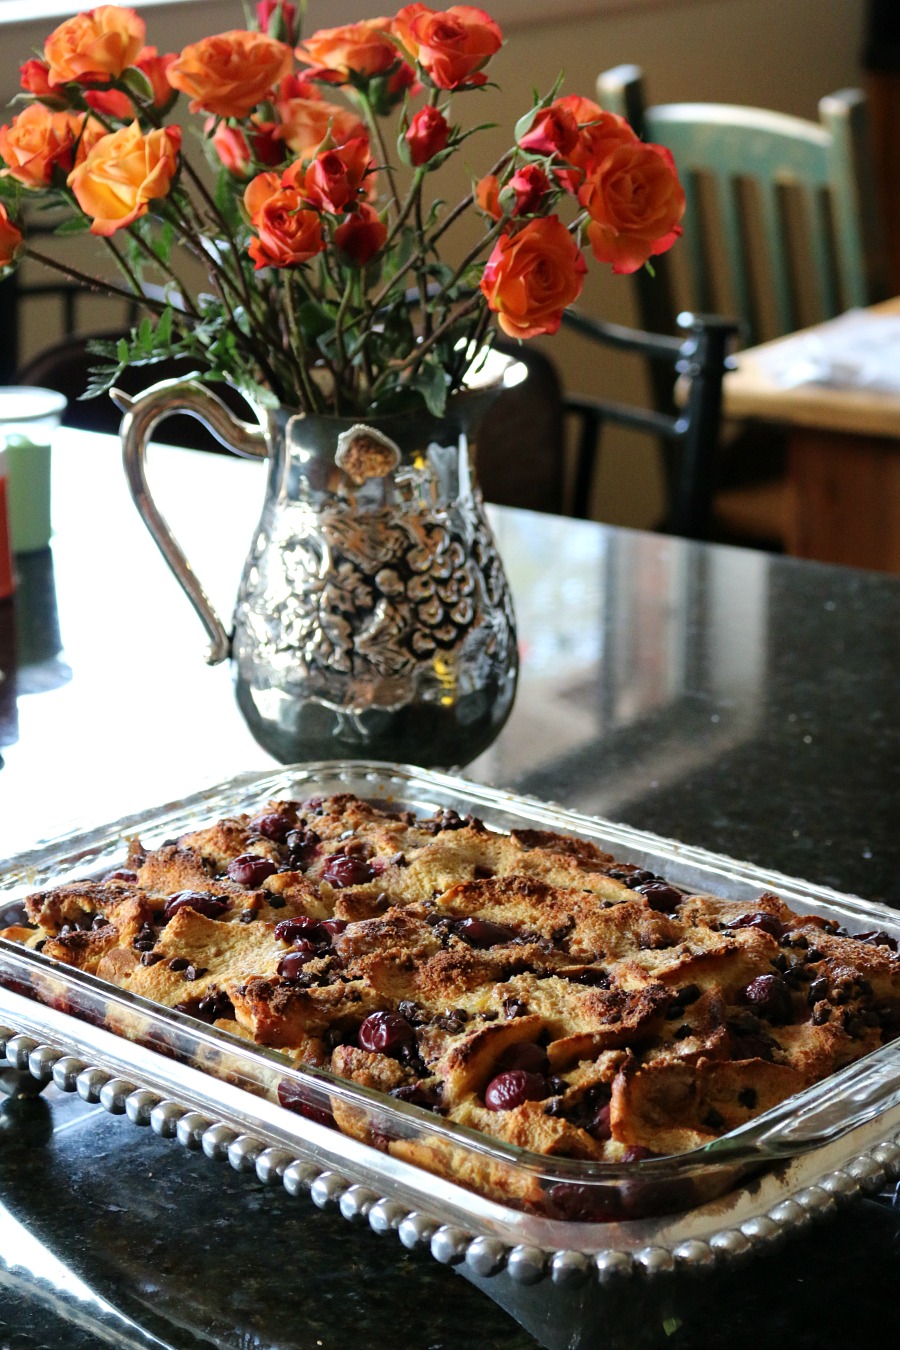 This would be the perfect brunch recipe. The perfect dessert, warm bread pudding with cherries and dark chocolate. Topped with whipped cream and hot fudge sauce. Decadent and delicious. || www.ceceliasgoodstuff.com